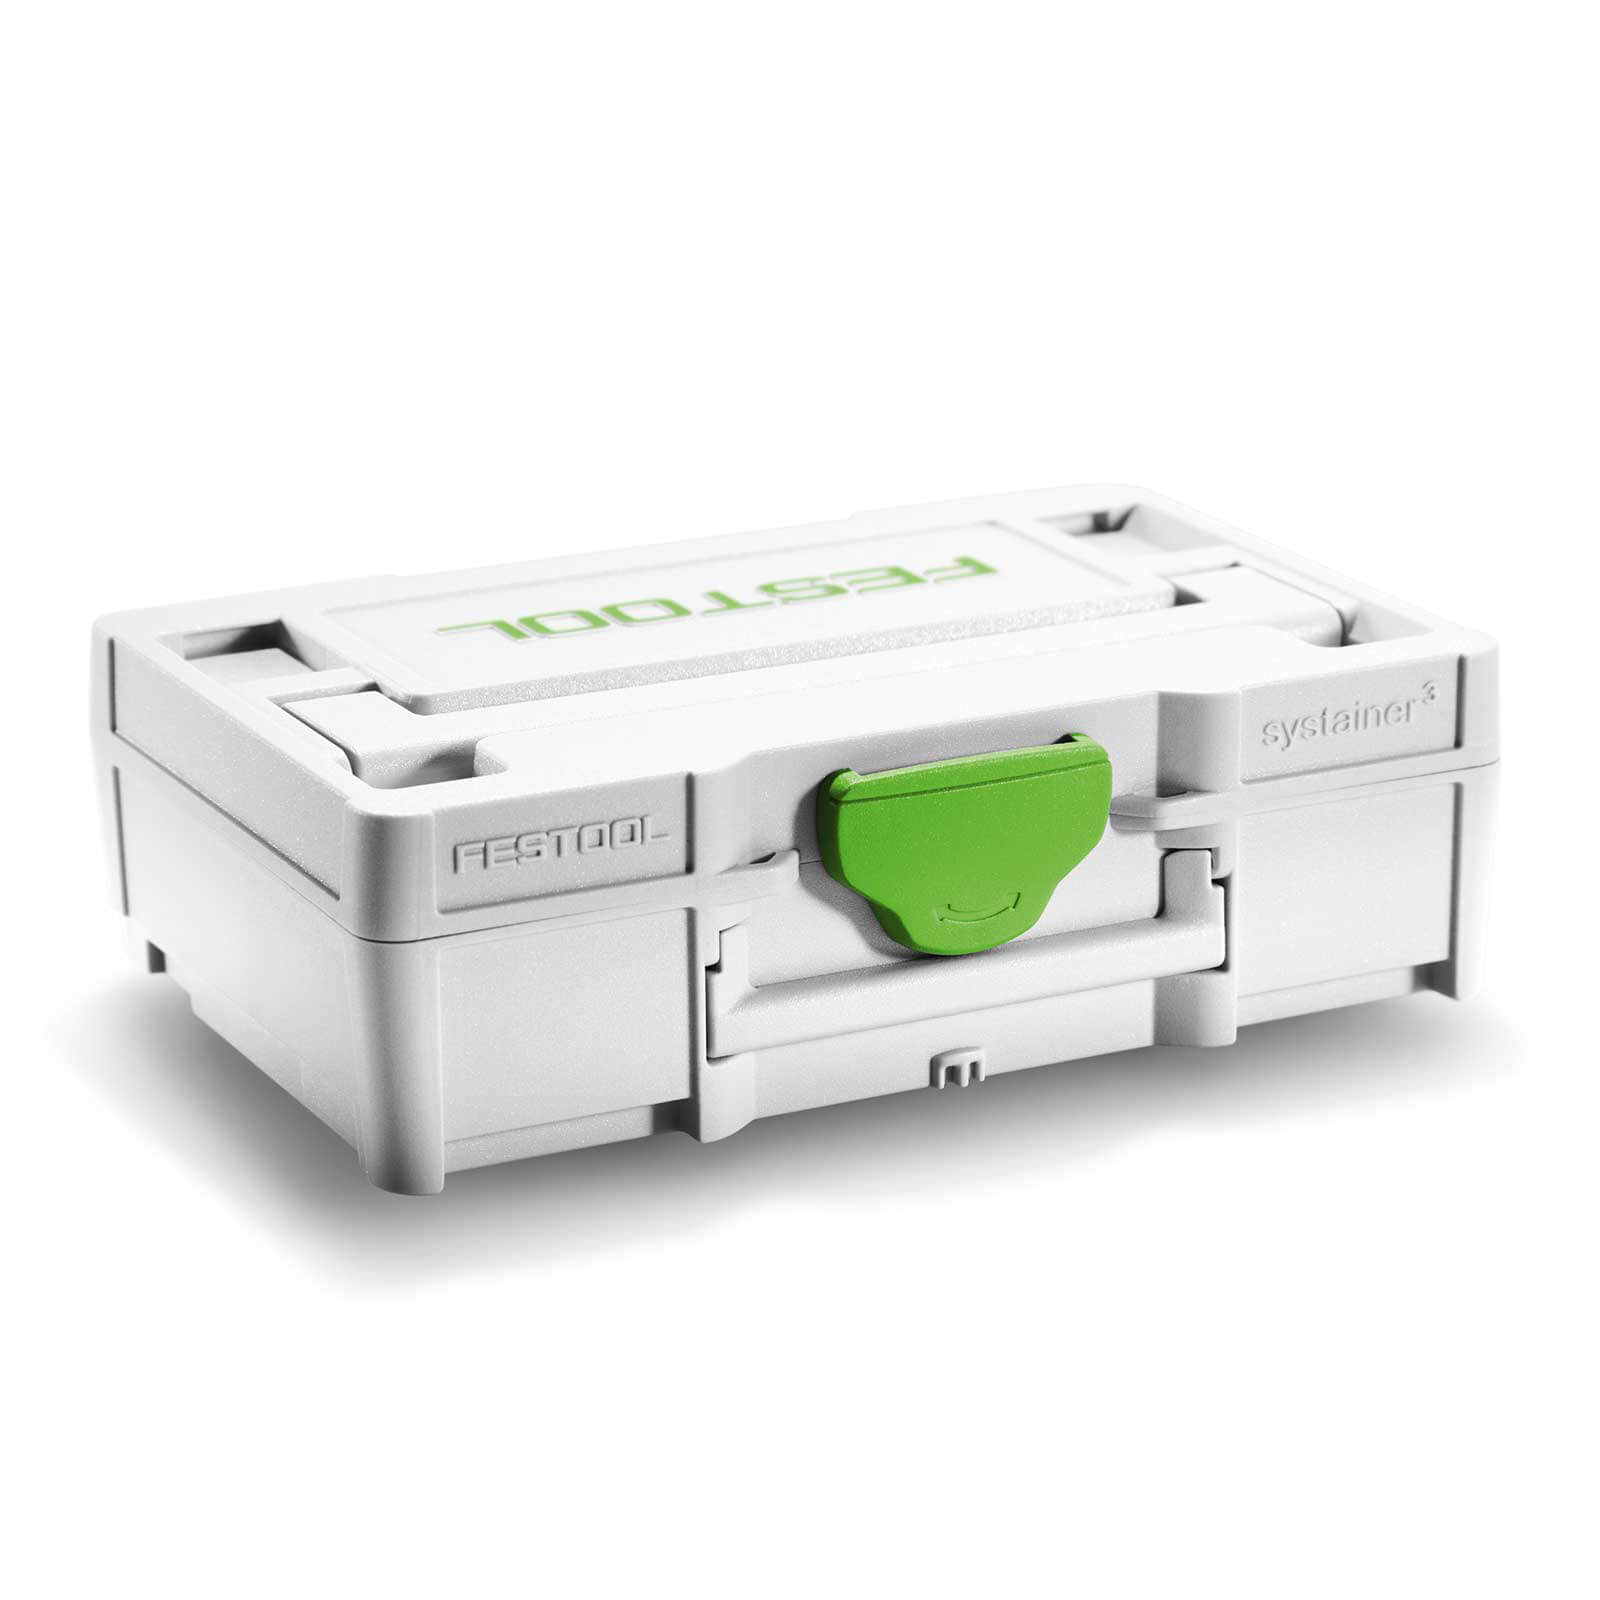 Image of Festool Fan Micro Systainer Tool Case